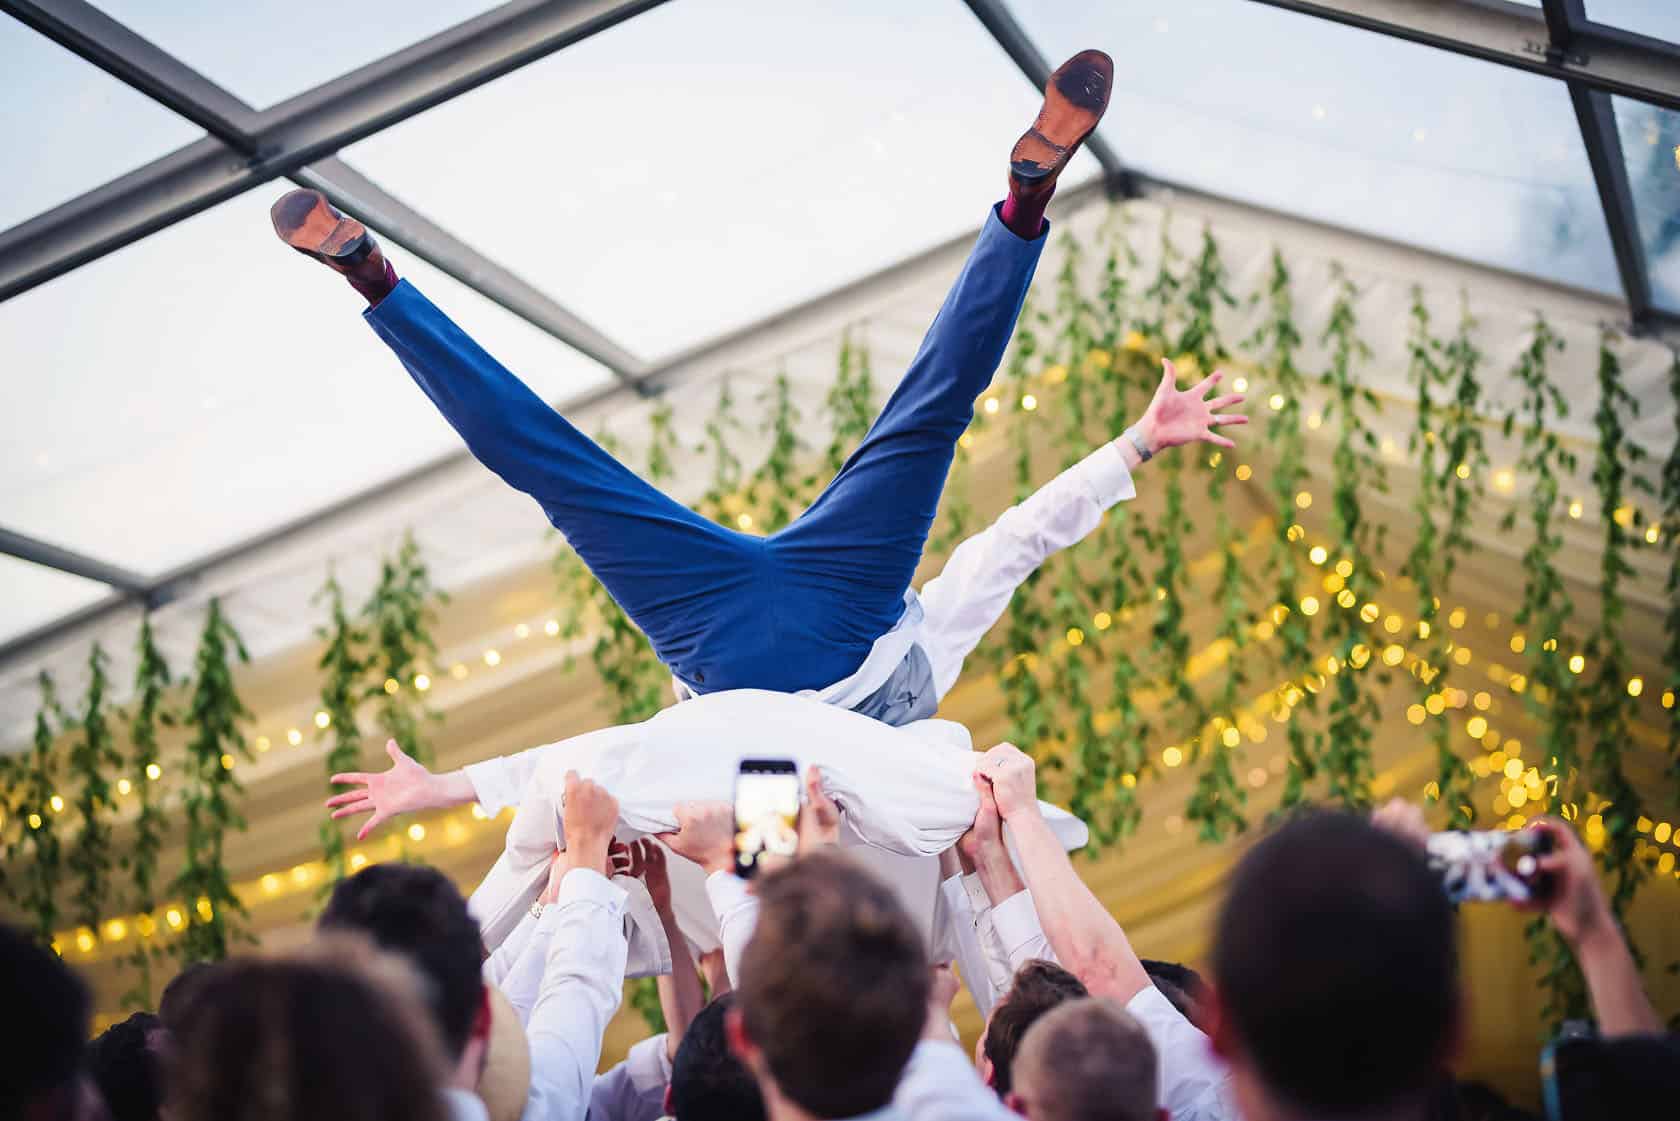 Thomas the groom doing some crowdsurfing